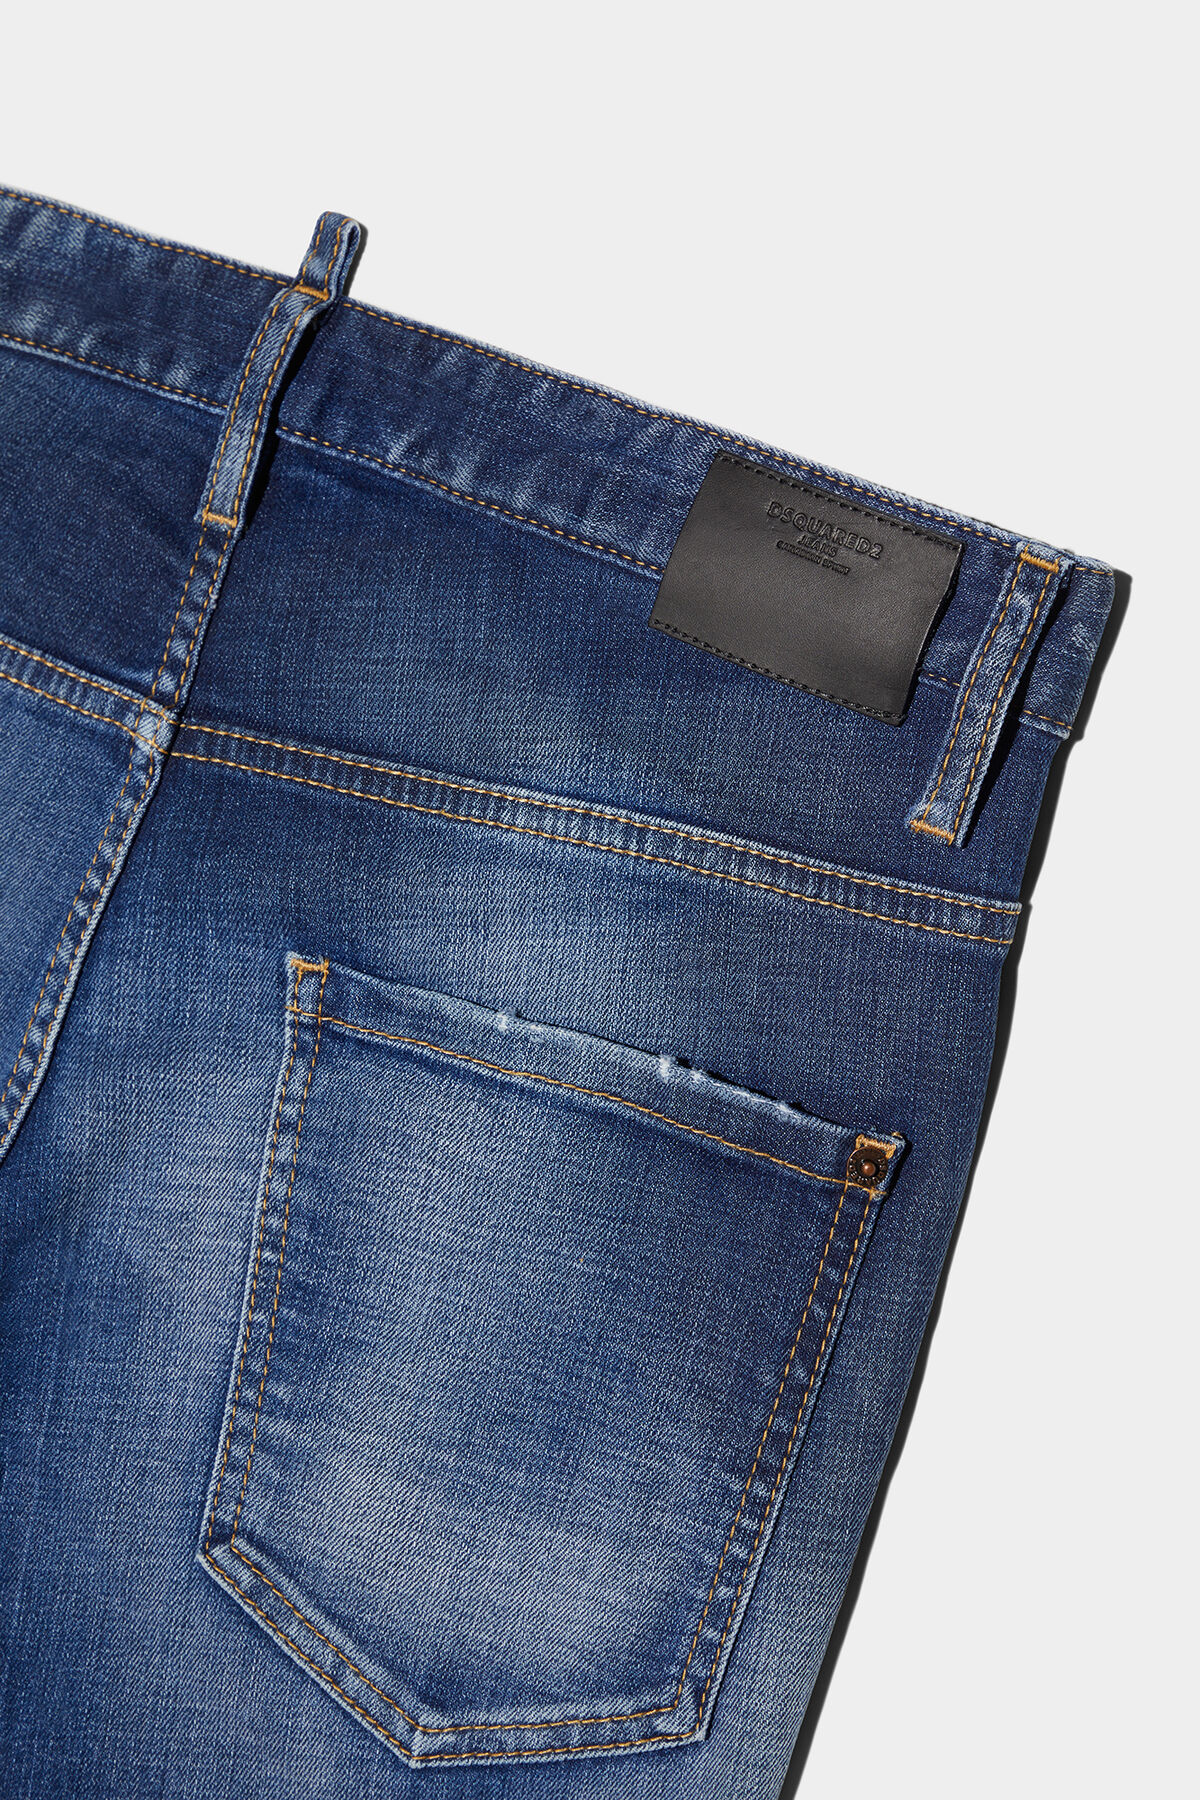 DSQUARED2 Jeans Skater in Washed Blue 48